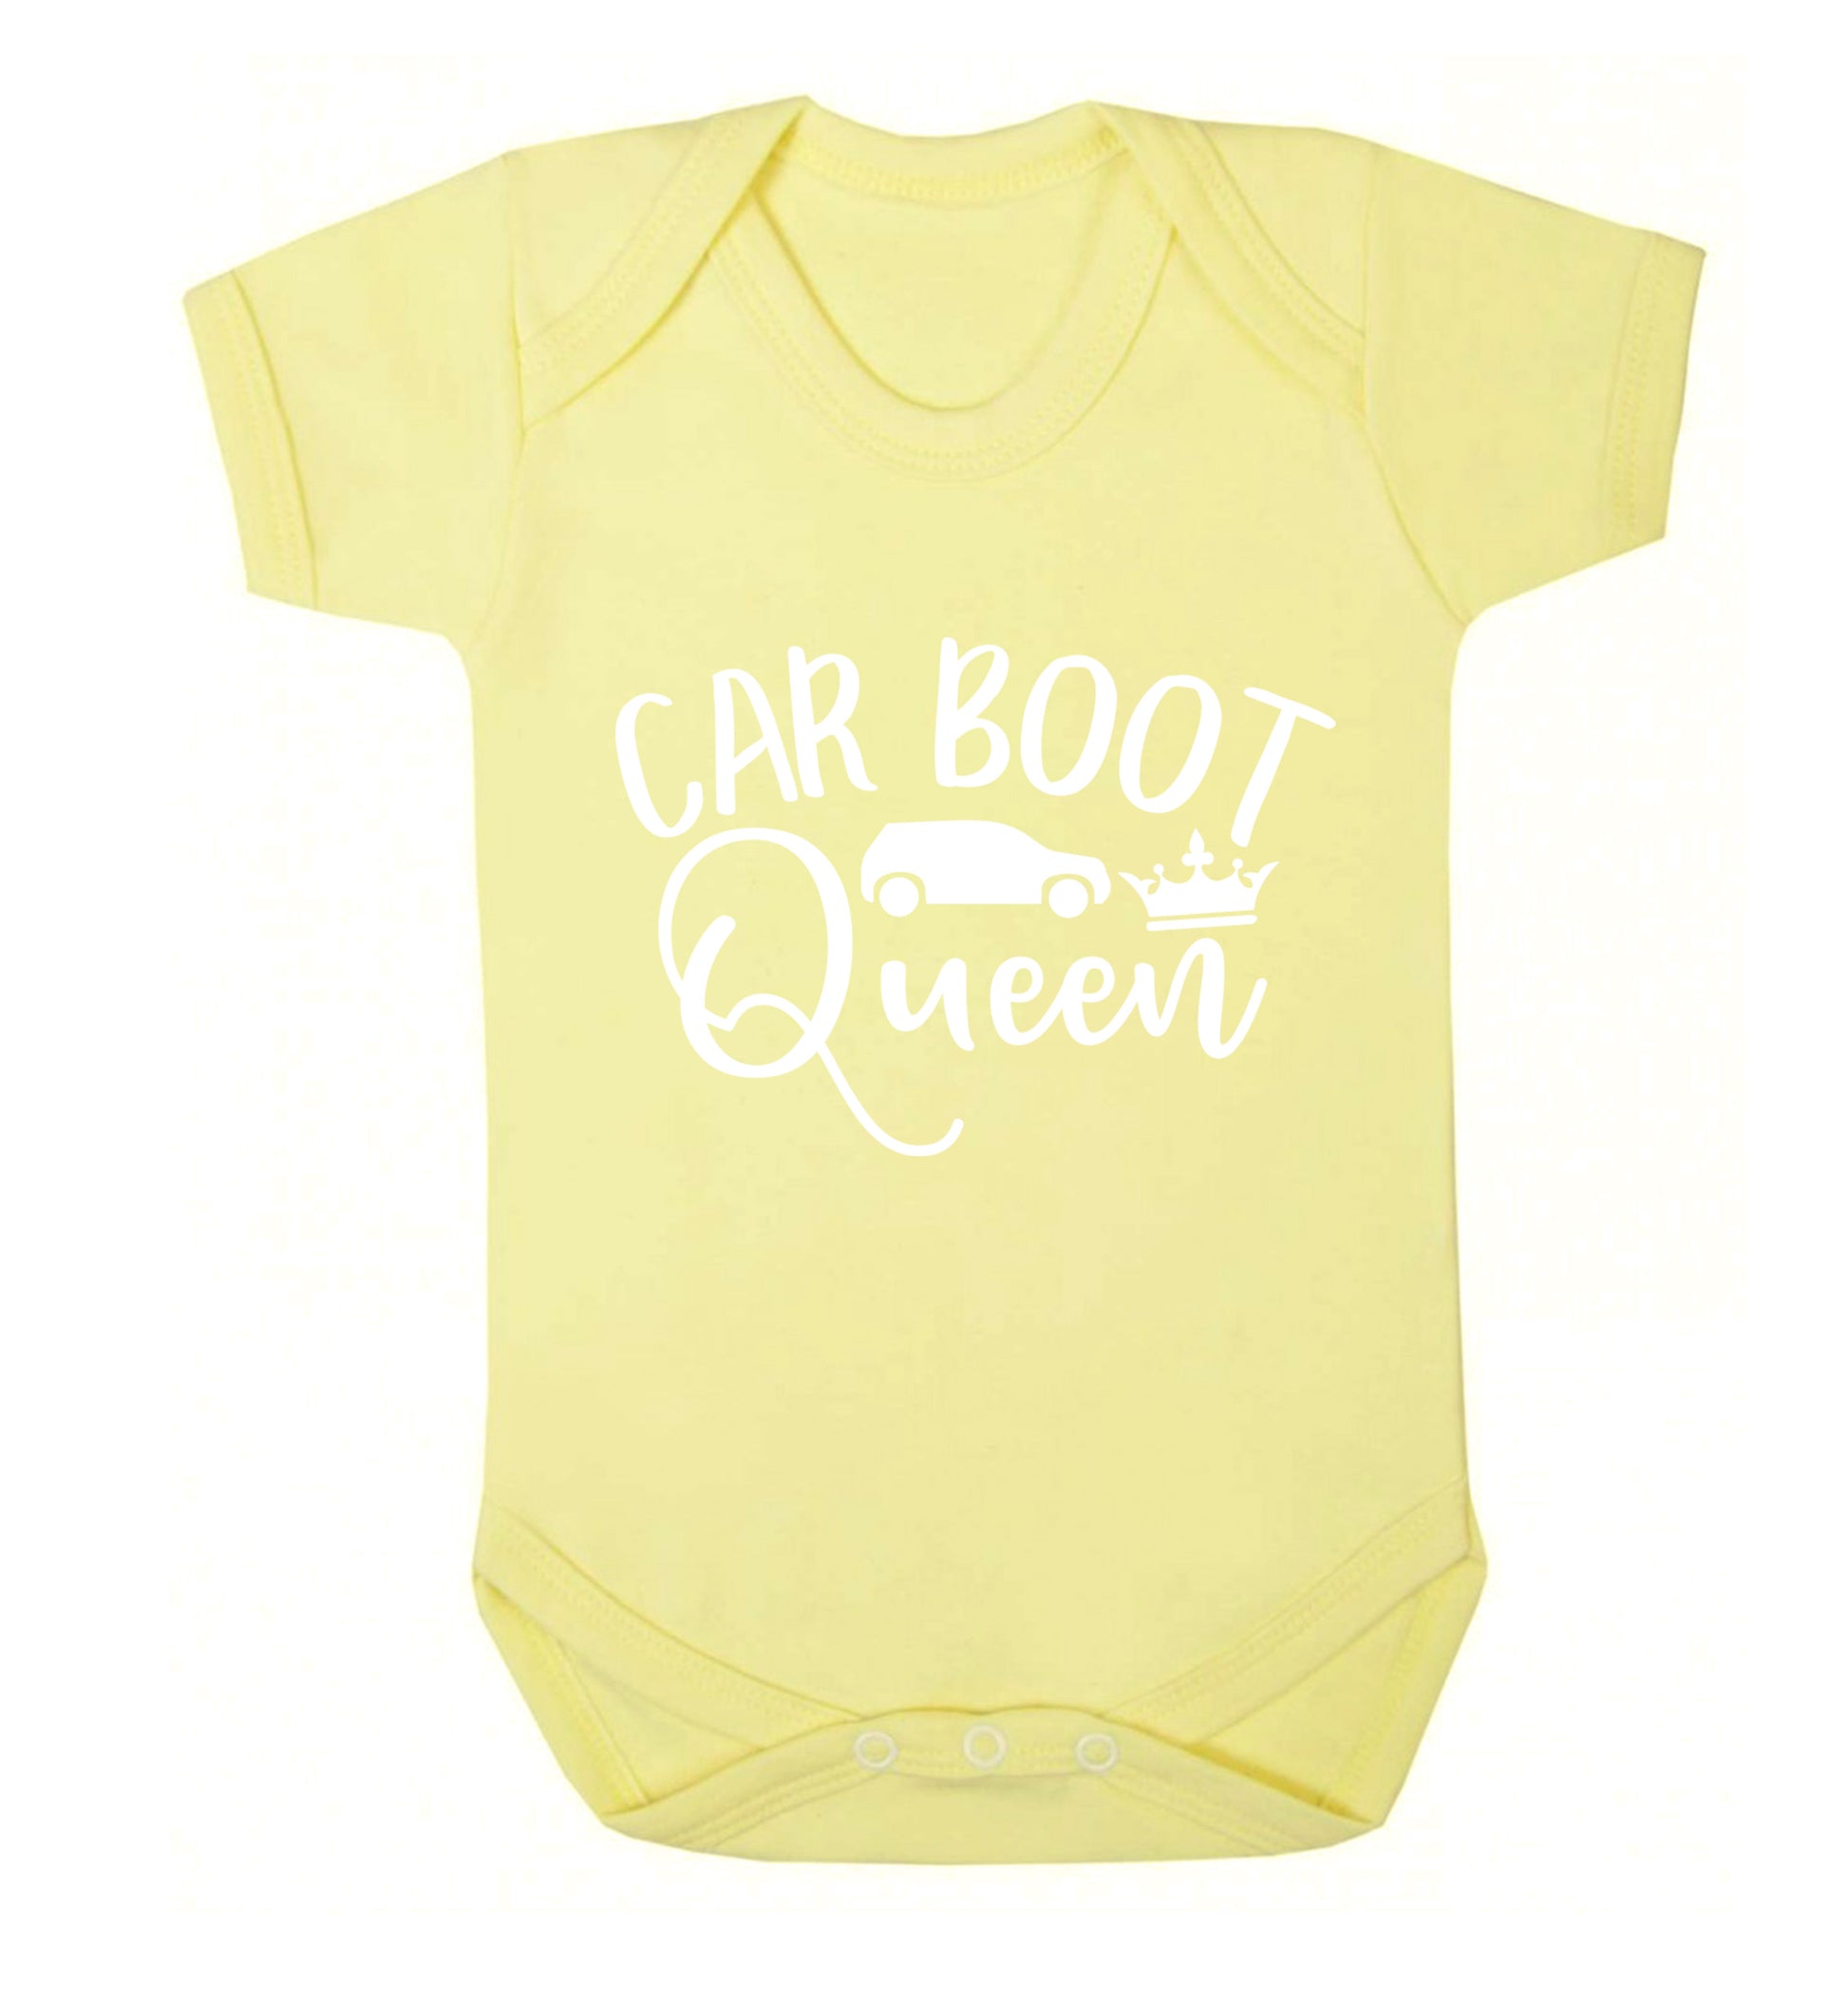 Carboot Queen Baby Vest pale yellow 18-24 months